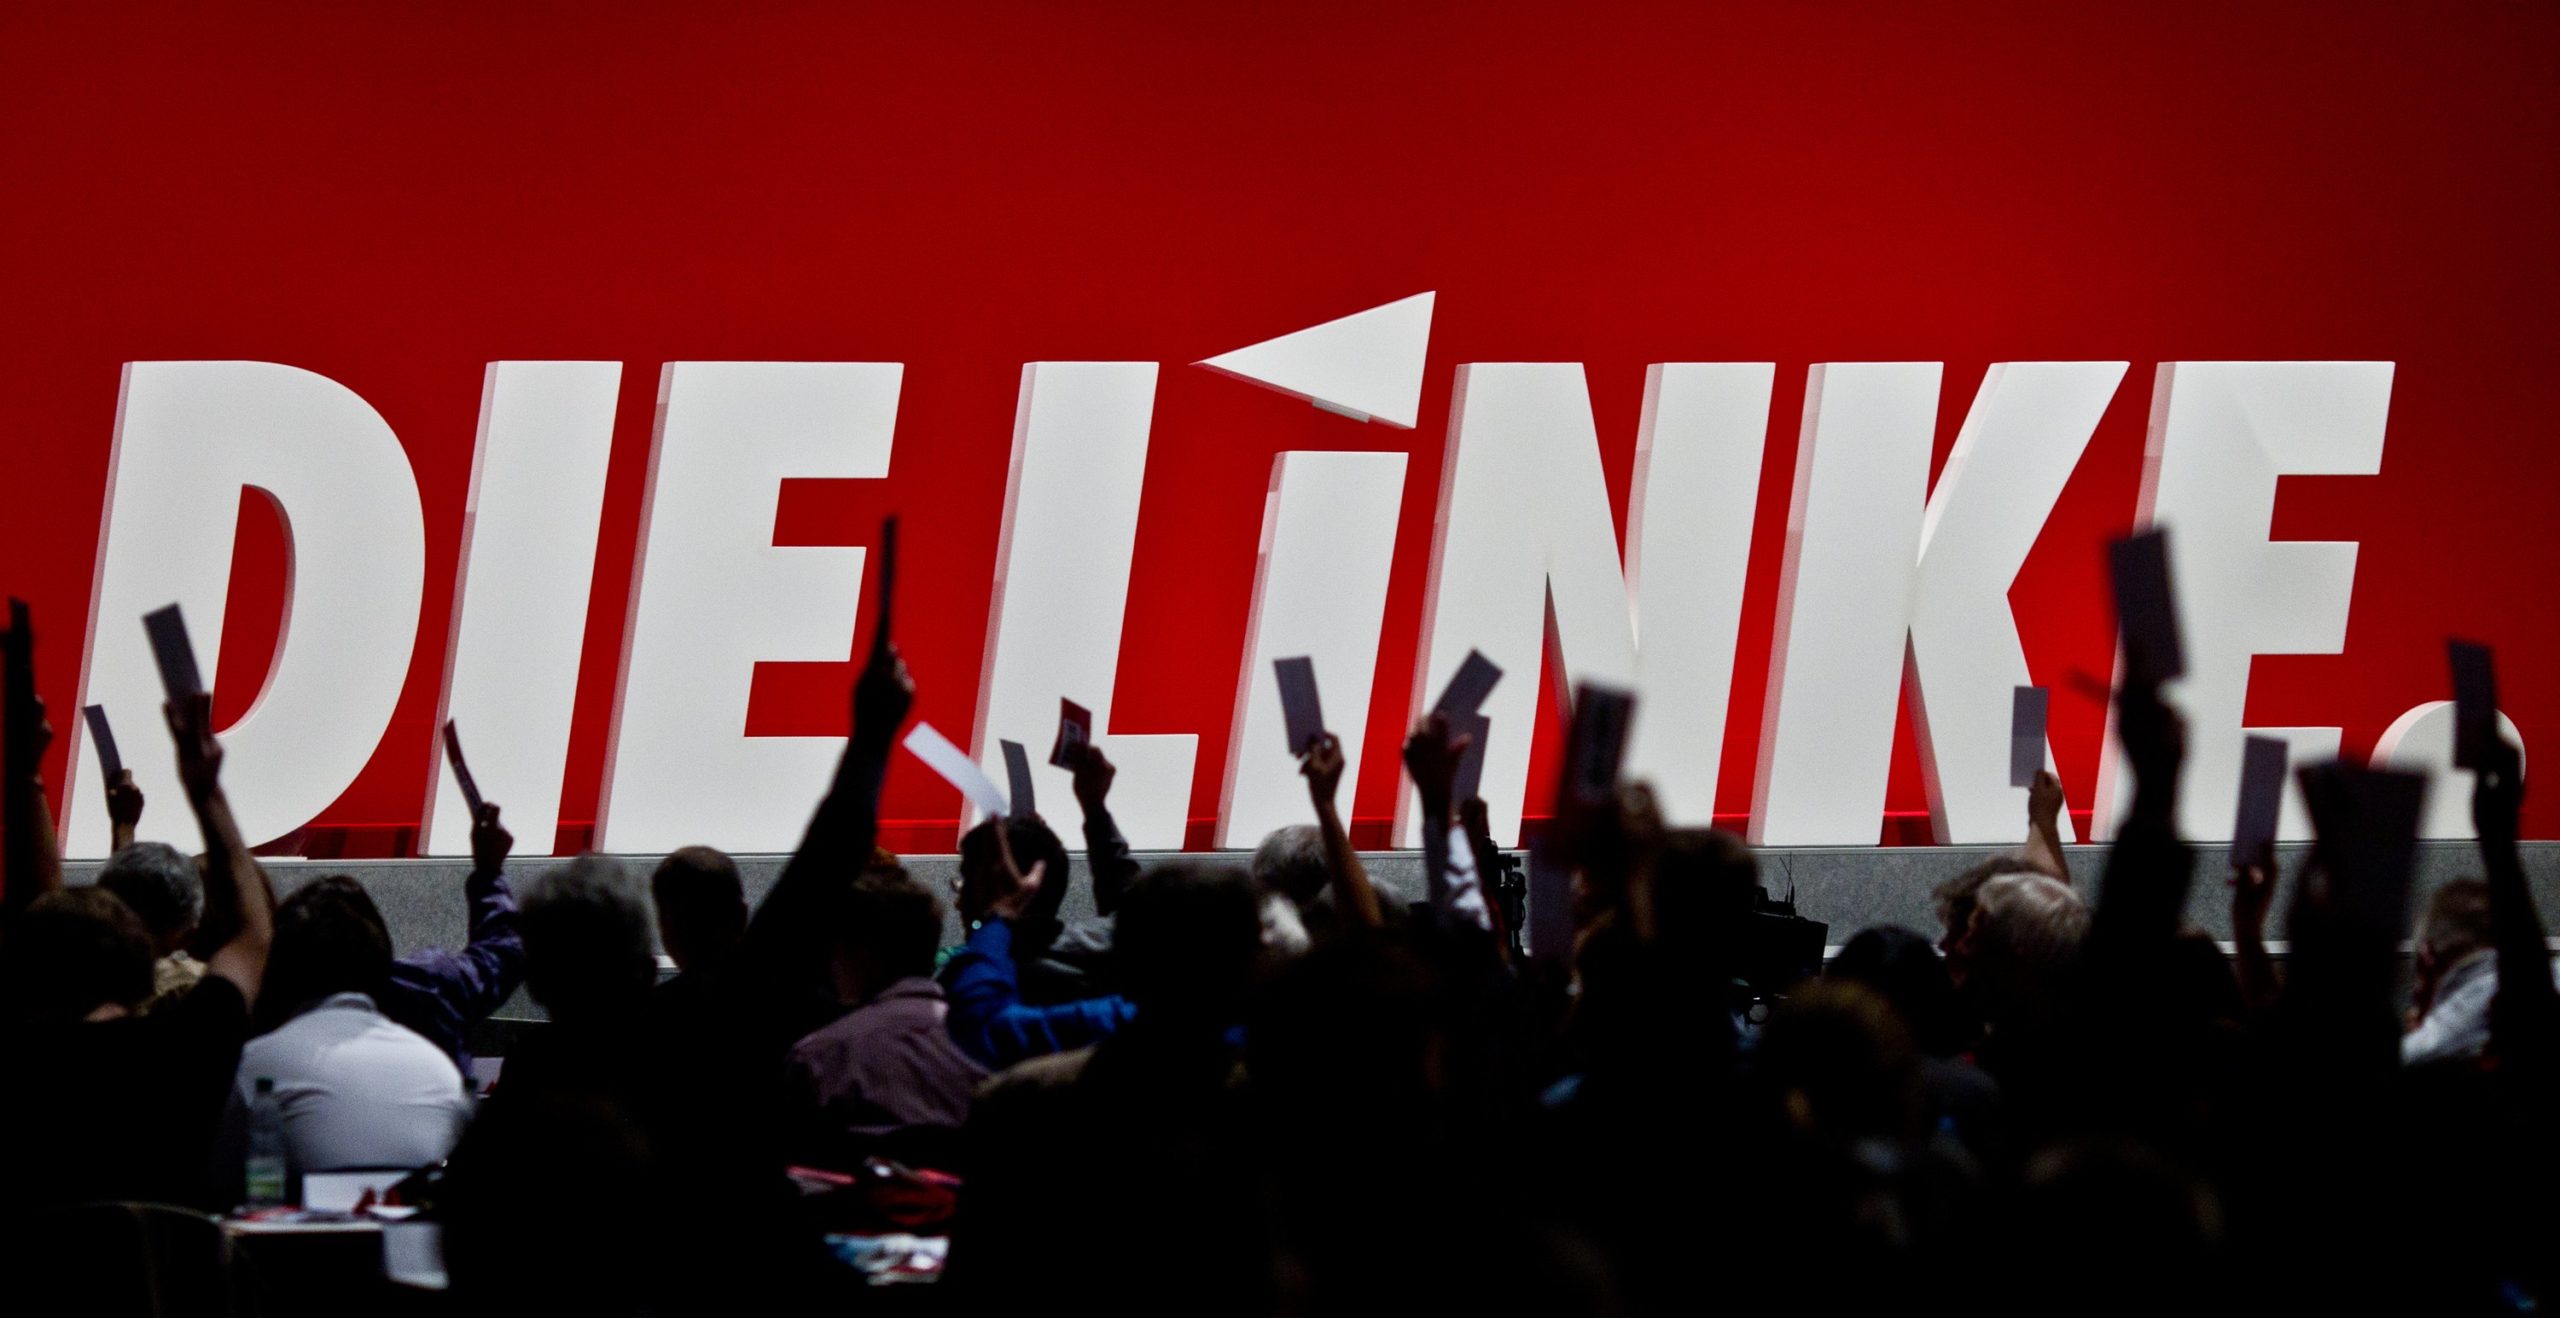 Silhouette of a crowd cheering in front of a huge sign that says "DIE LINKE," the German leftist party.